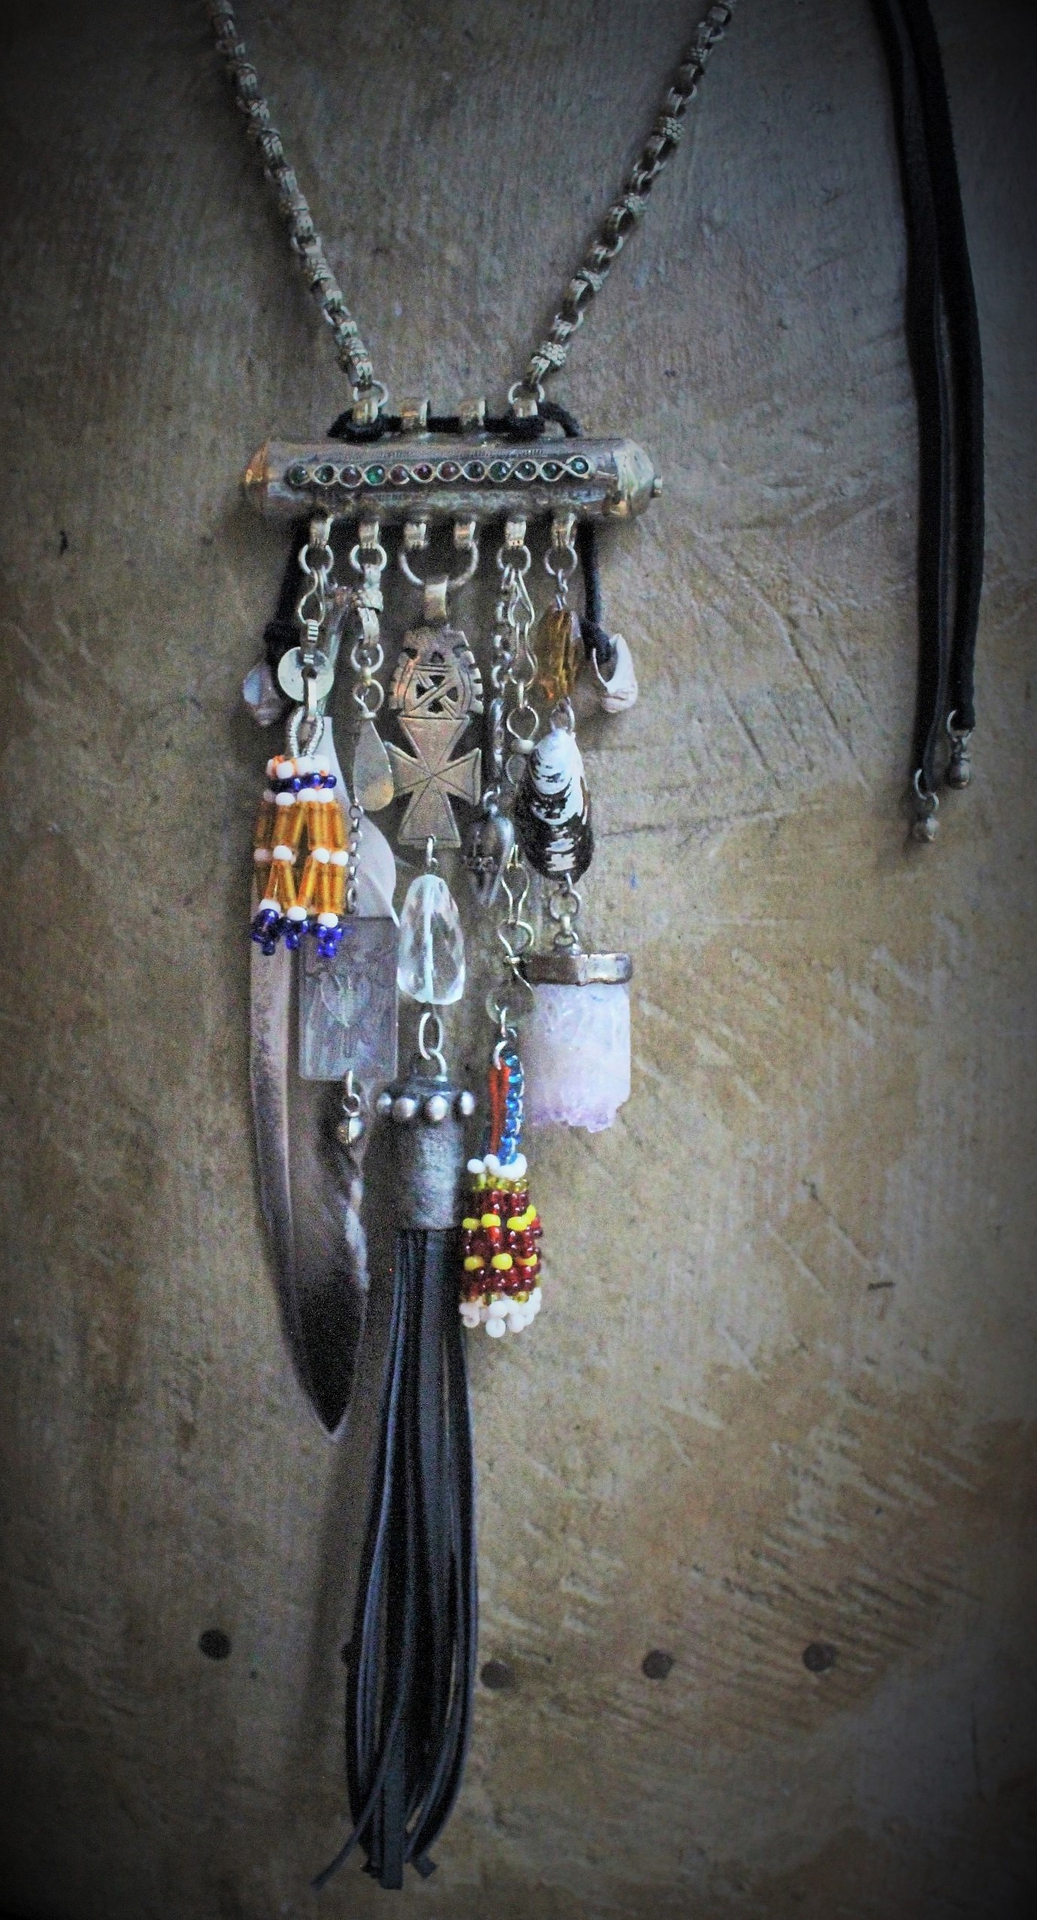 Joy & Pain Necklace w/Antique Gypsy Kuchi Pendant,Sterling Engraved 3 of Swords Tarot Medal,Antique Beaded Banajra Tassels,Faceted Clear Rock Quartz+ More!